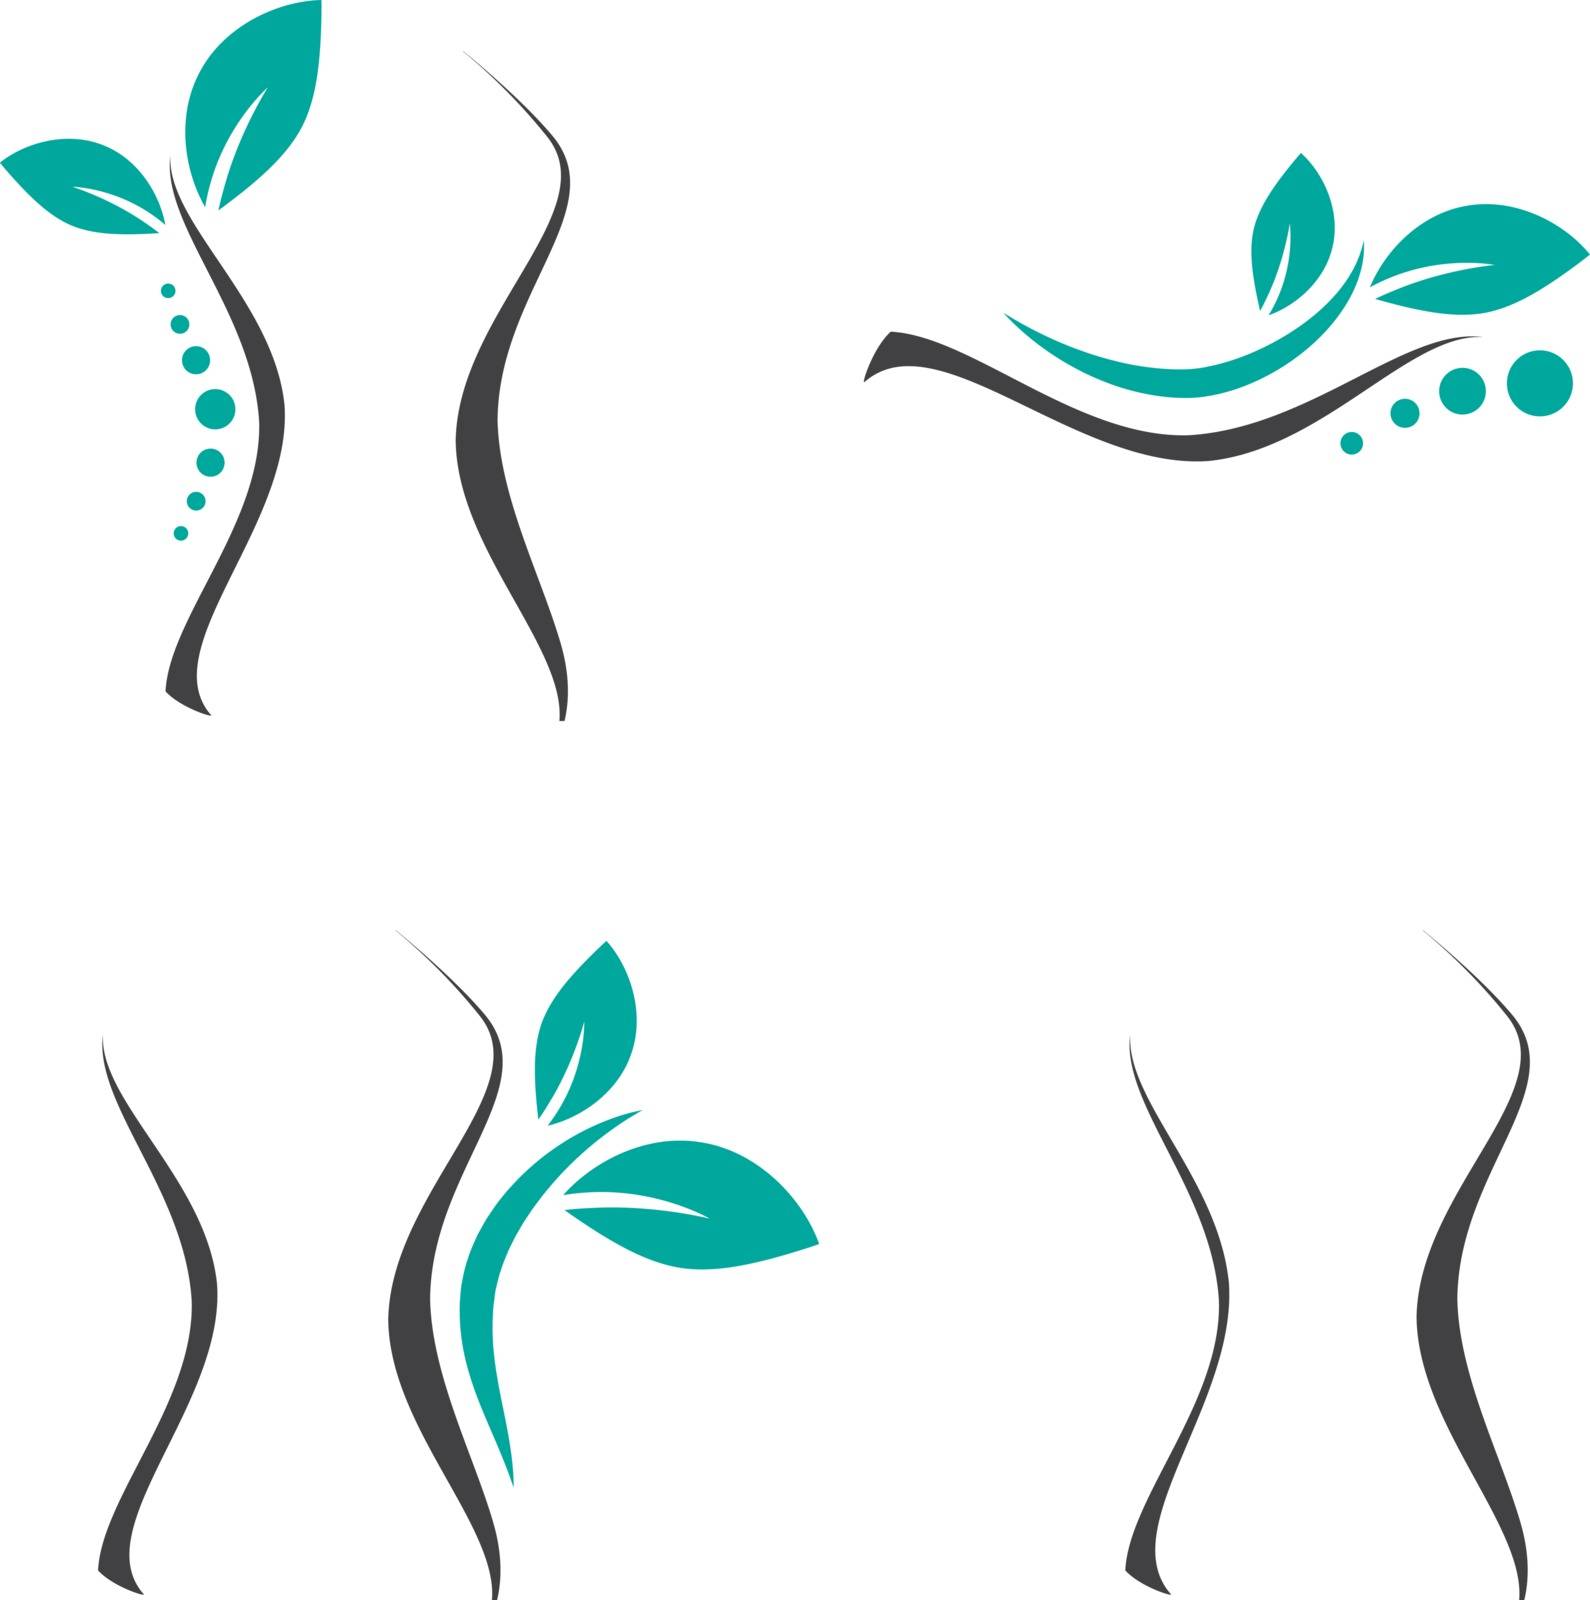 Woman Surgery and Chiropractic Logo Set by SNR